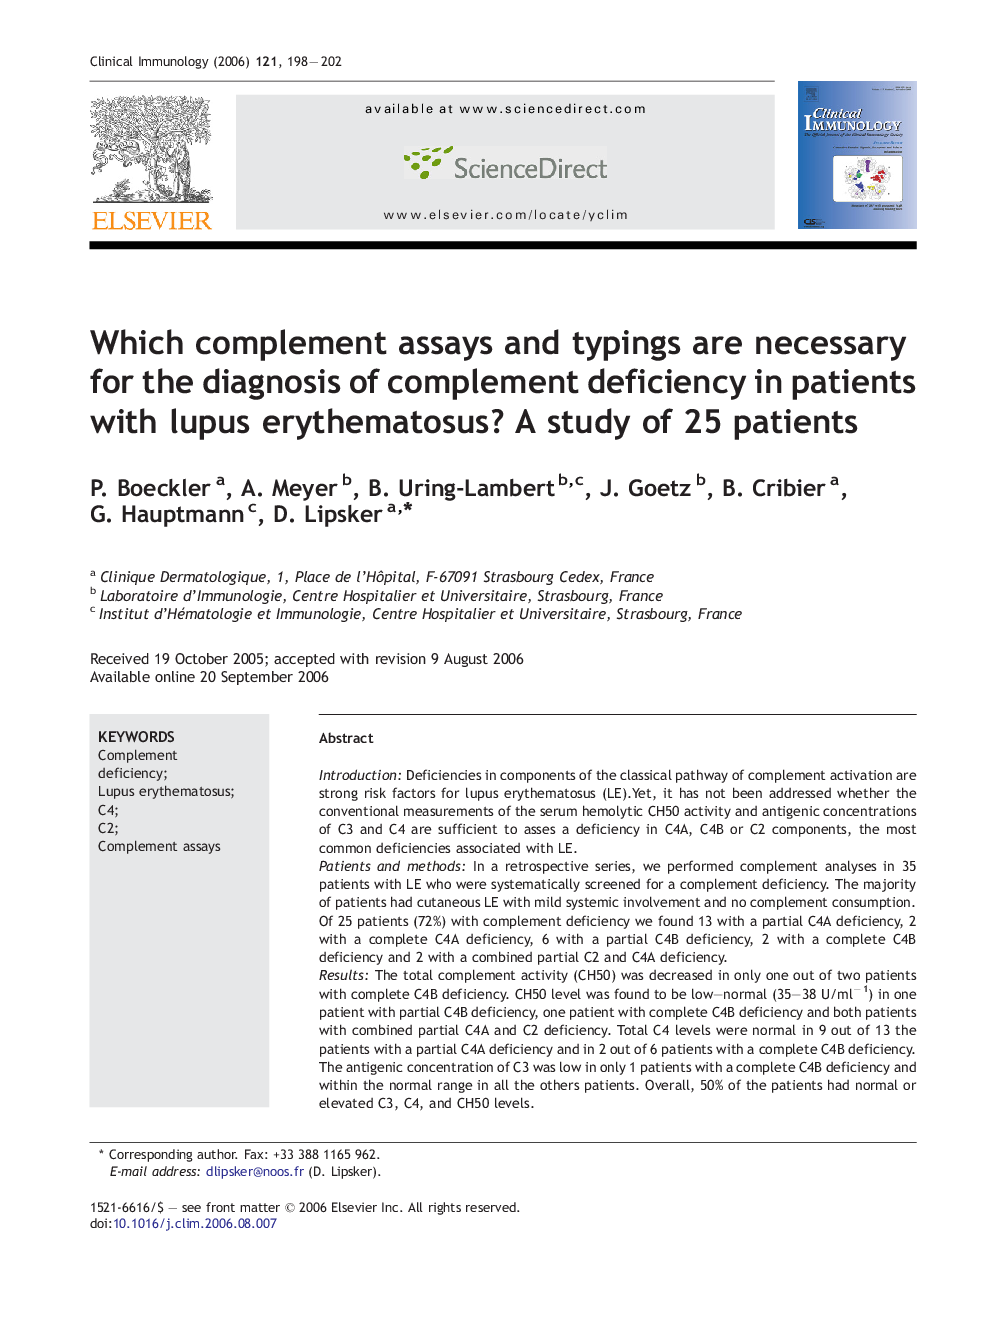 Which complement assays and typings are necessary for the diagnosis of complement deficiency in patients with lupus erythematosus? A study of 25 patients